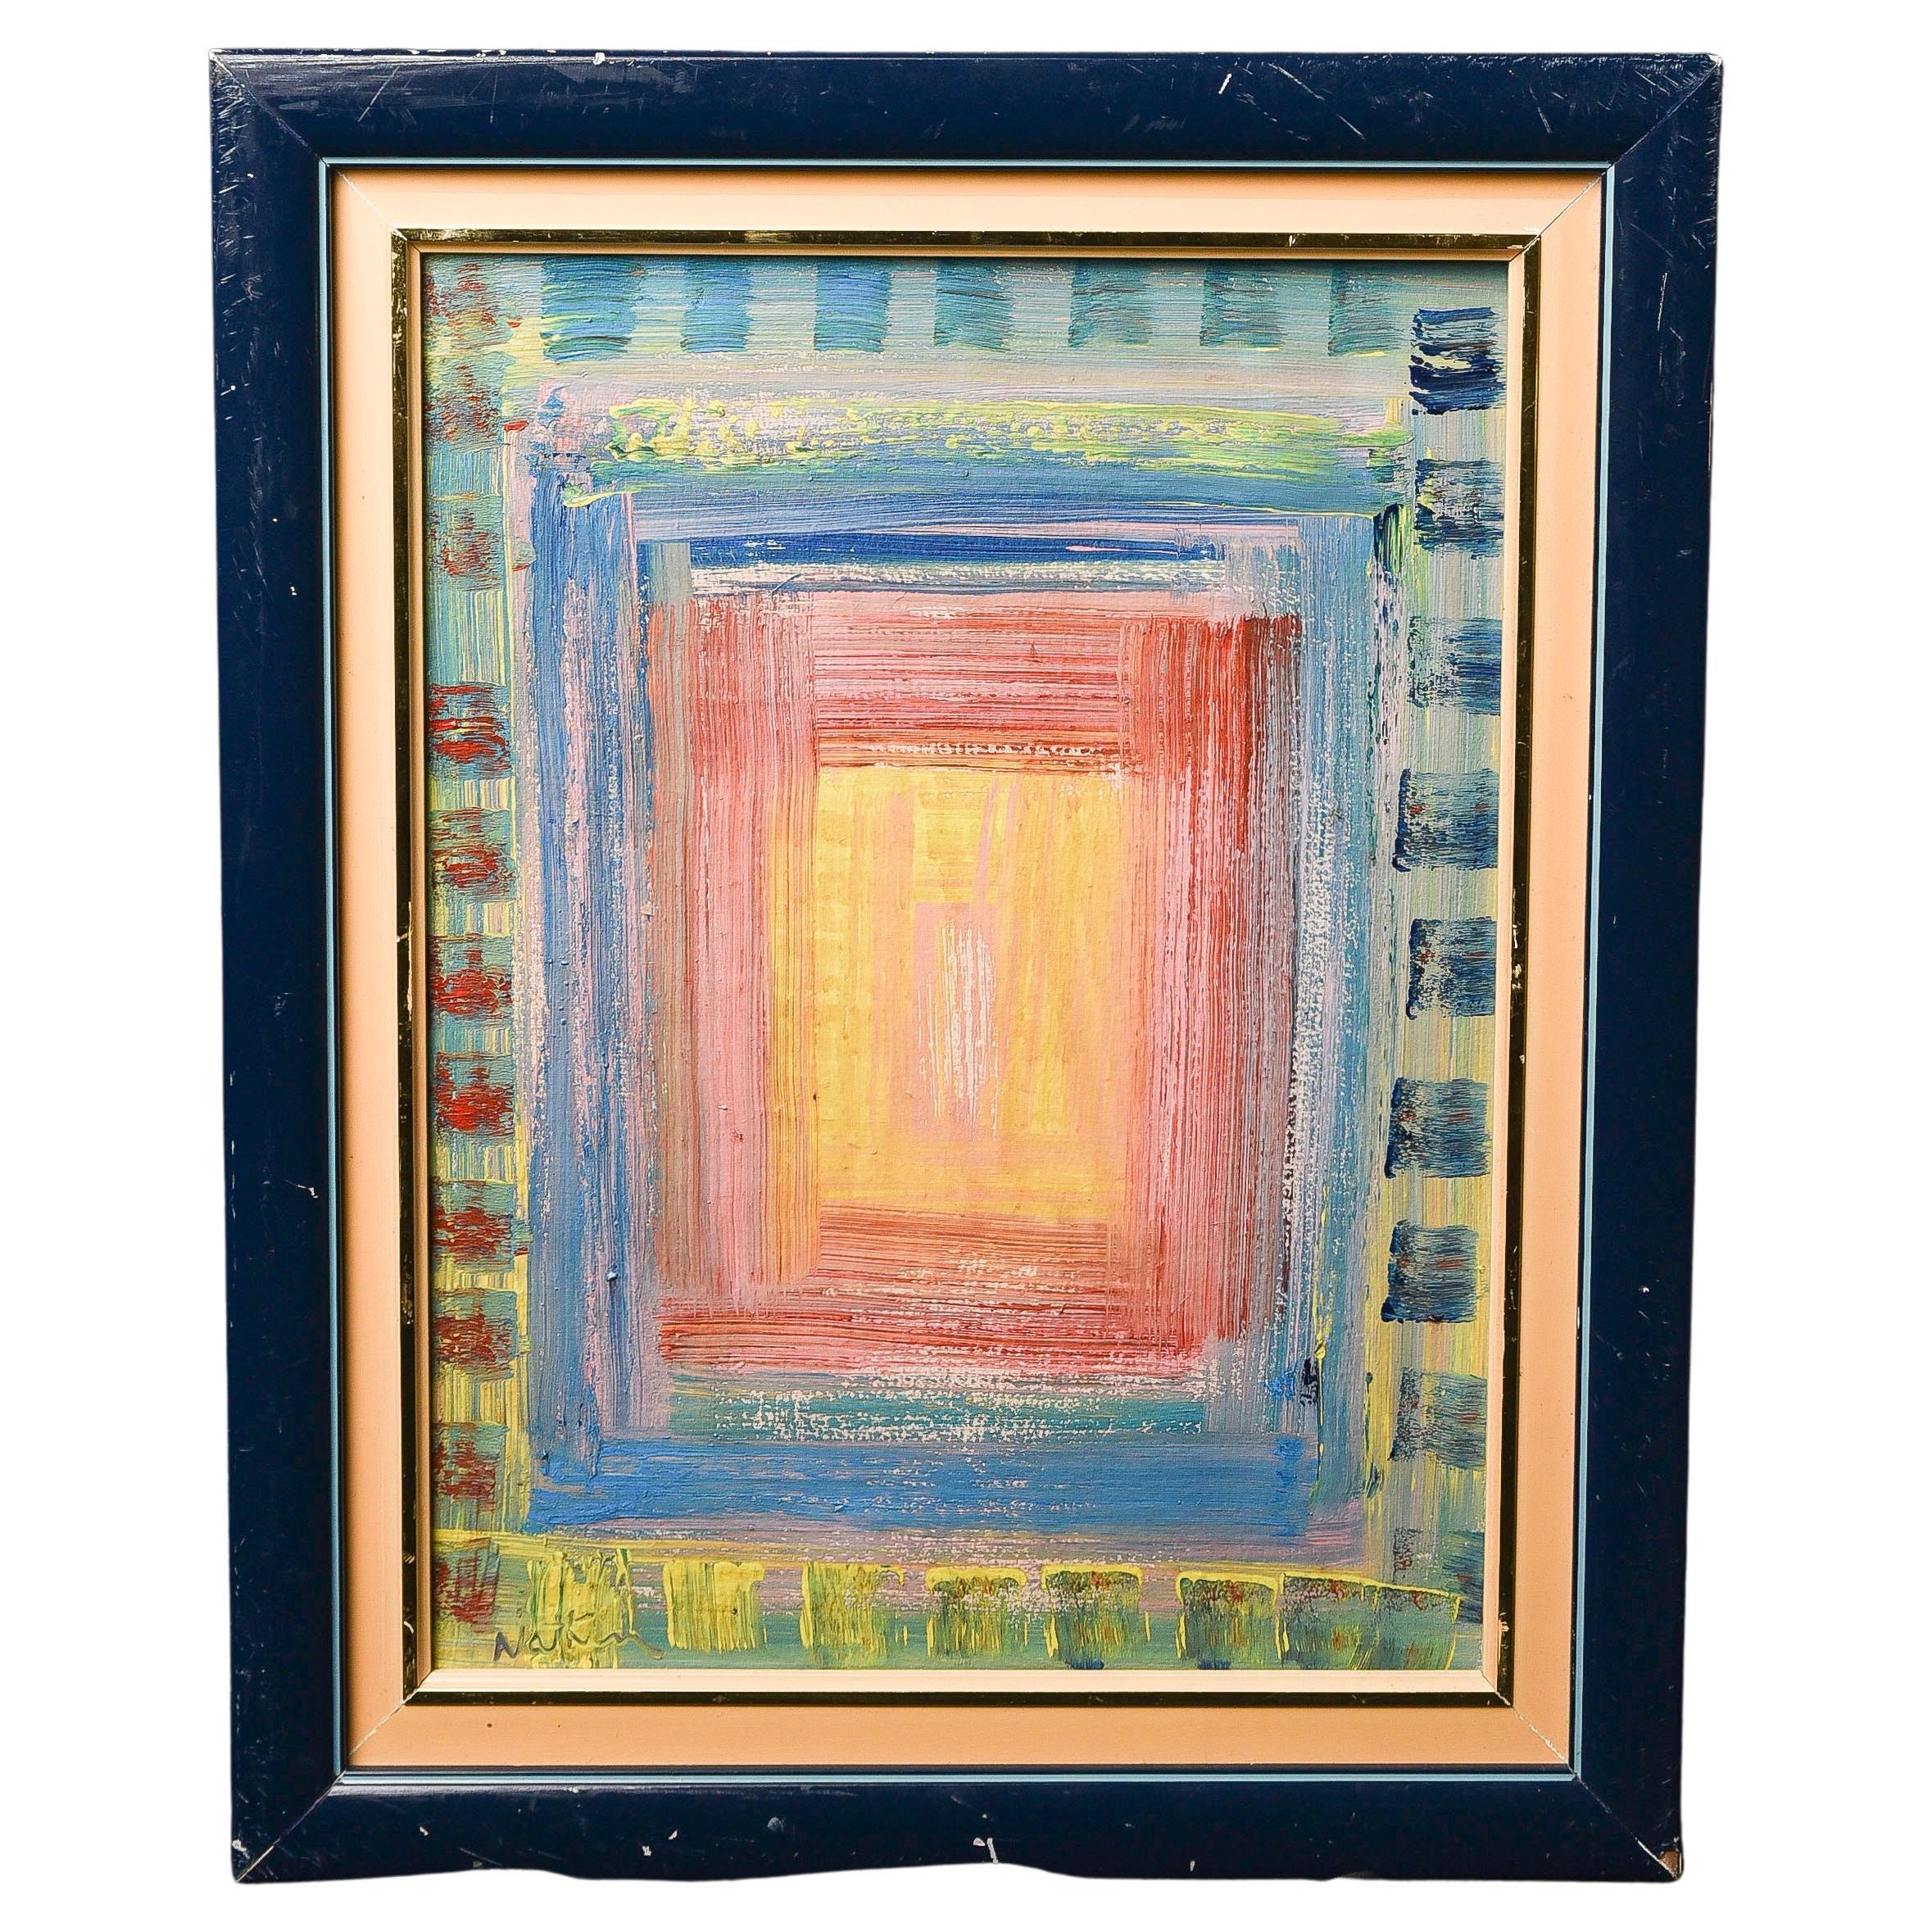 1960's Robert Natkin Painting in a Unique Style-Related to Portal Series - 9846 For Sale